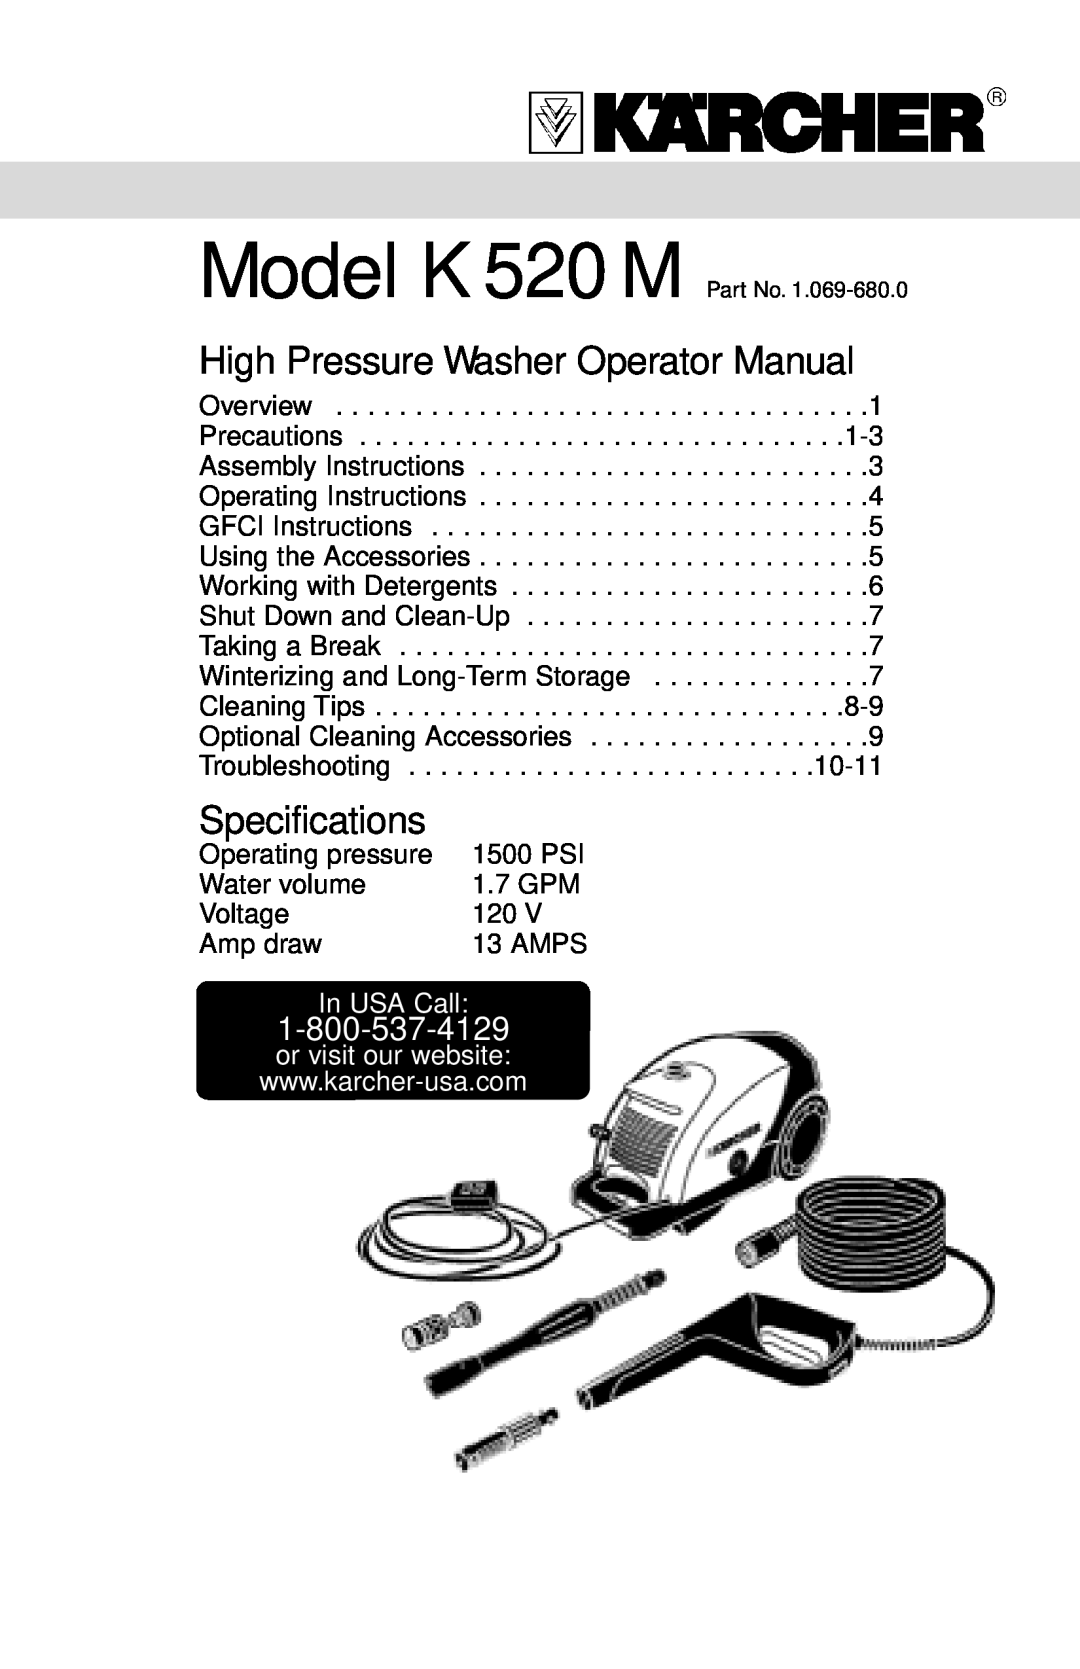 Karcher K 520 specifications In USA Call, High Pressure Washer Operator Manual, Specifications 